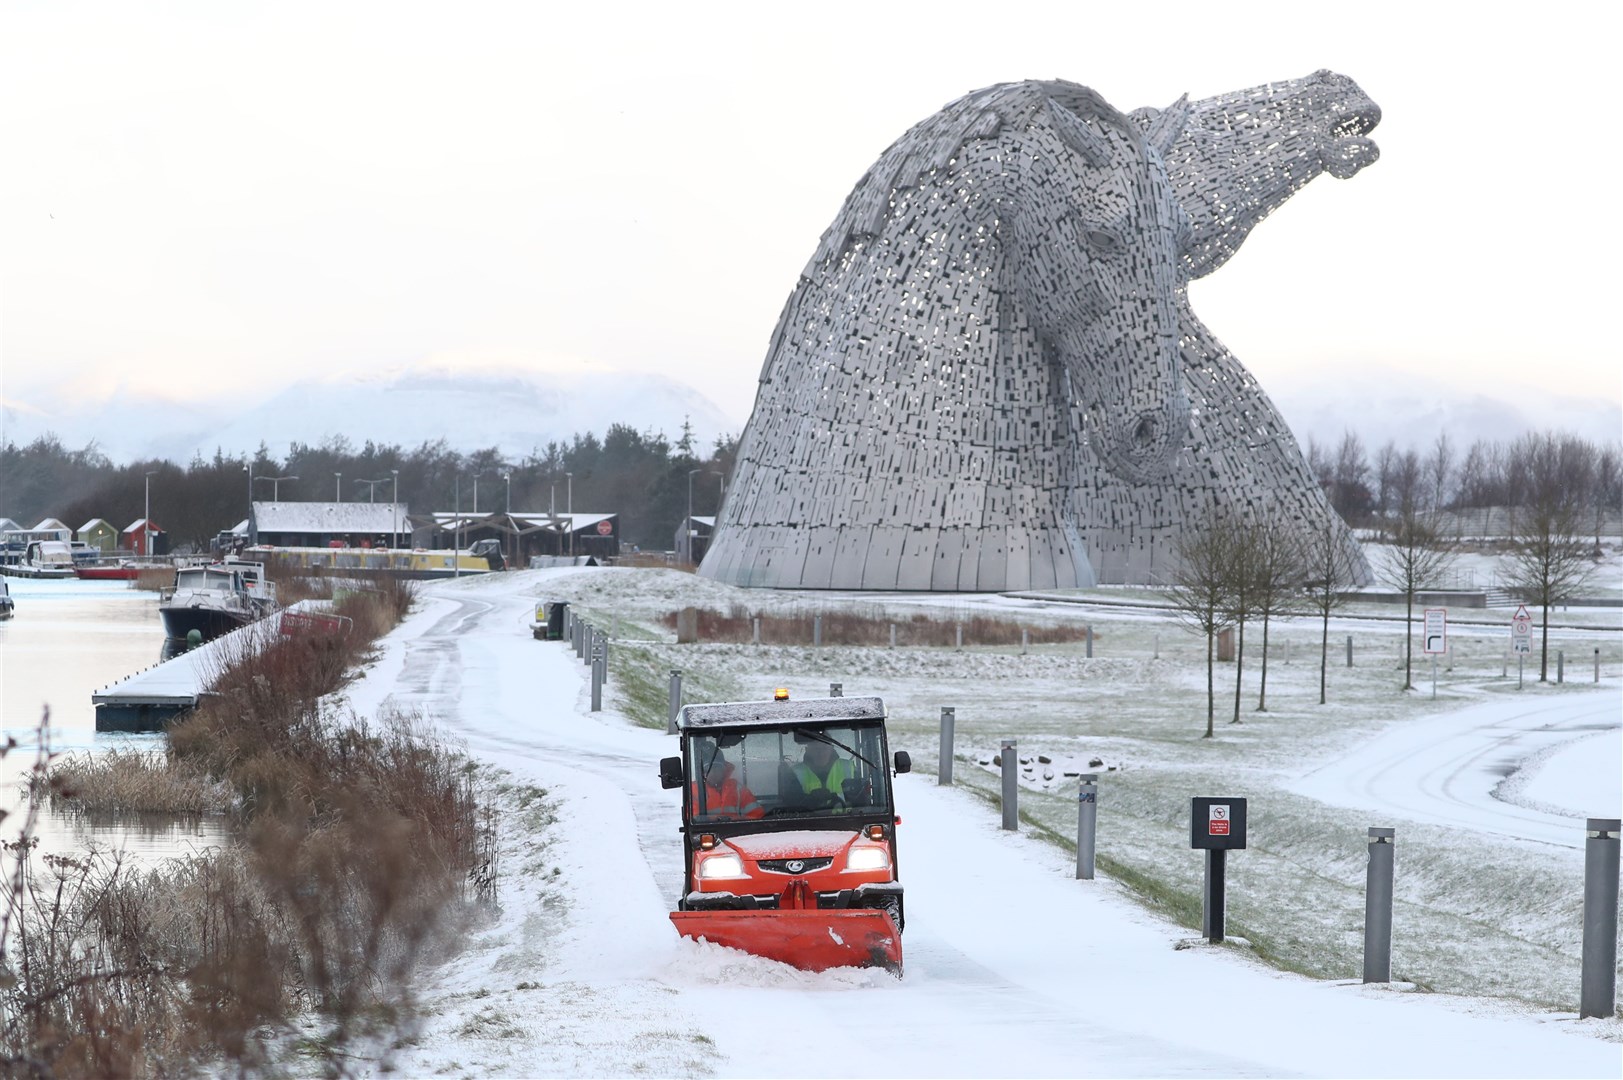 A staff member uses a vehicle to clear snow on a pathway at the Kelpies, near Falkirk in Scotland (Andrew Milligan/PA)